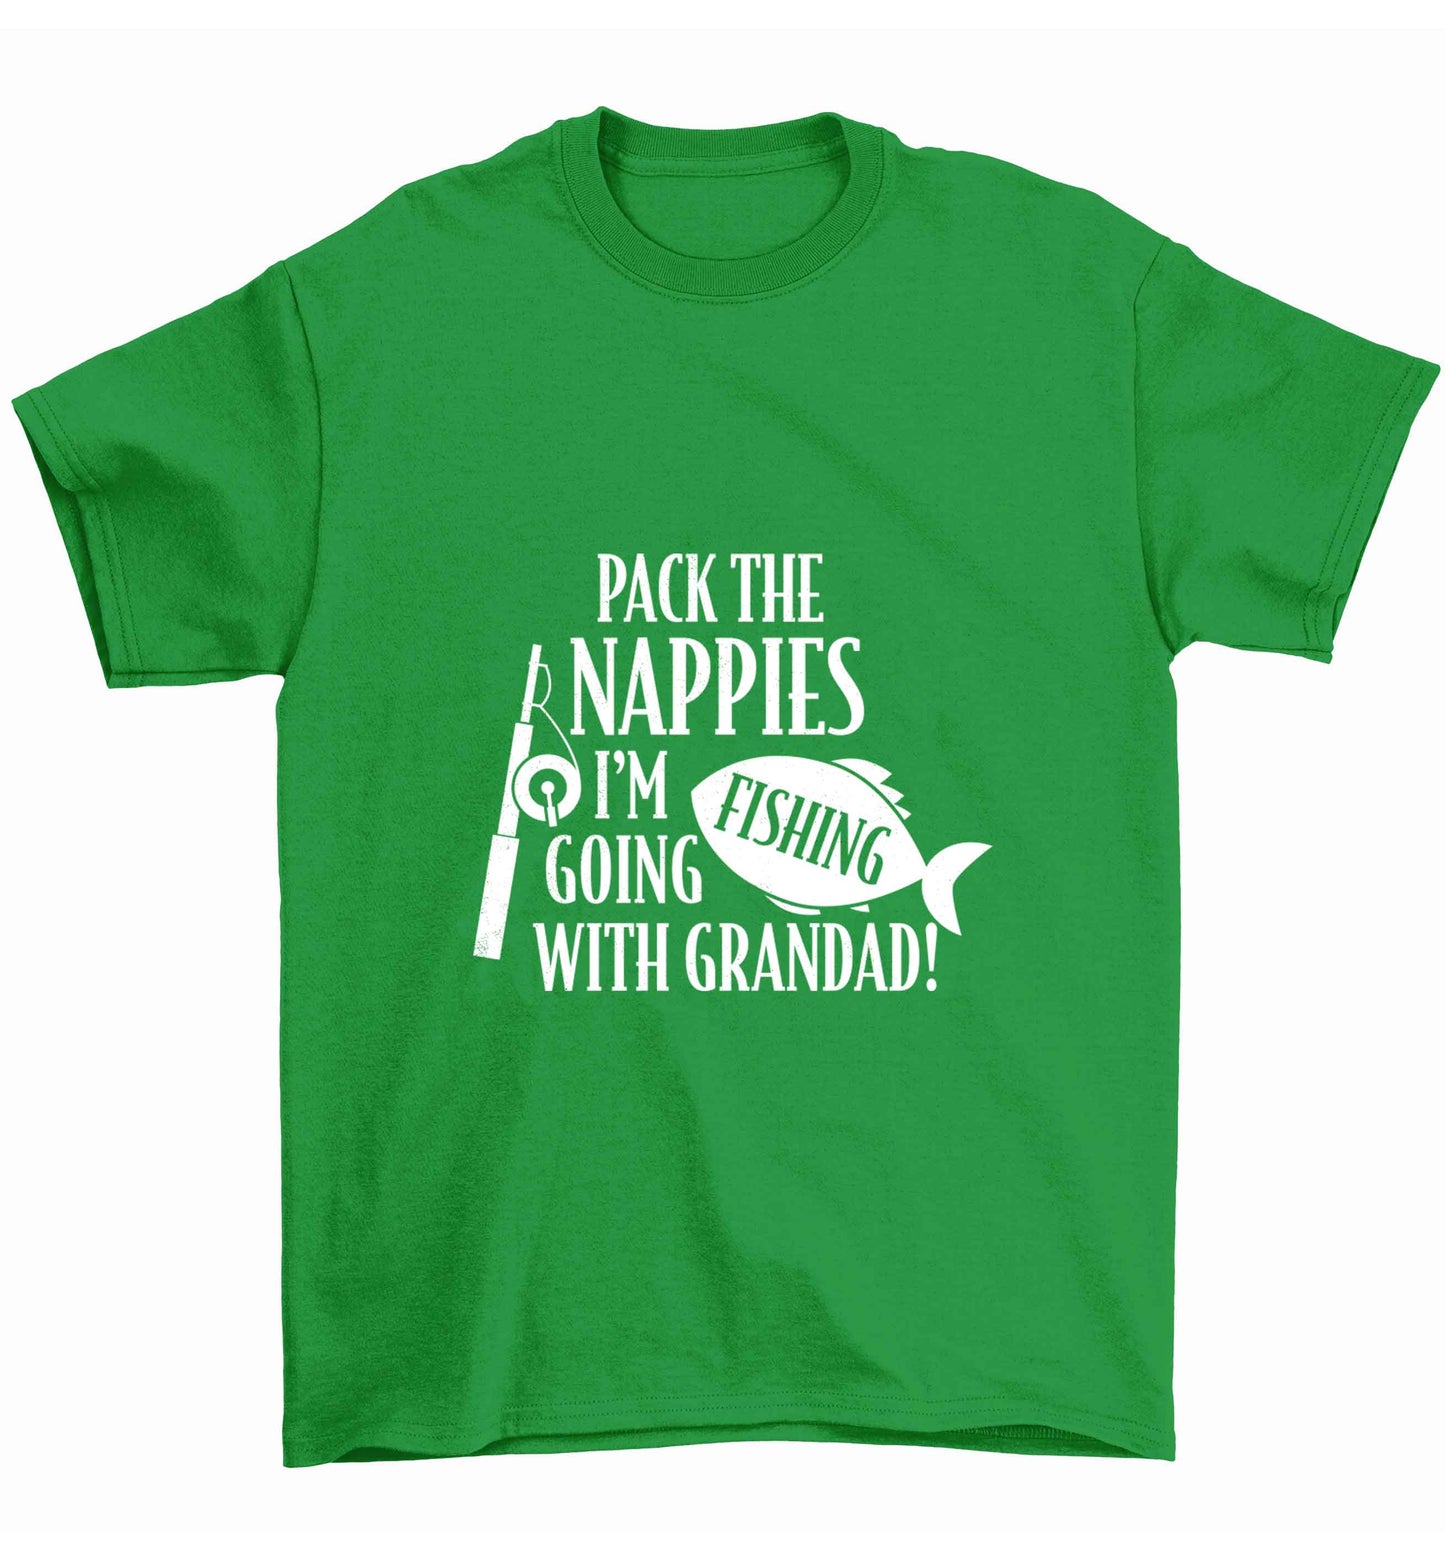 Pack the nappies I'm going fishing with Grandad Children's green Tshirt 12-13 Years